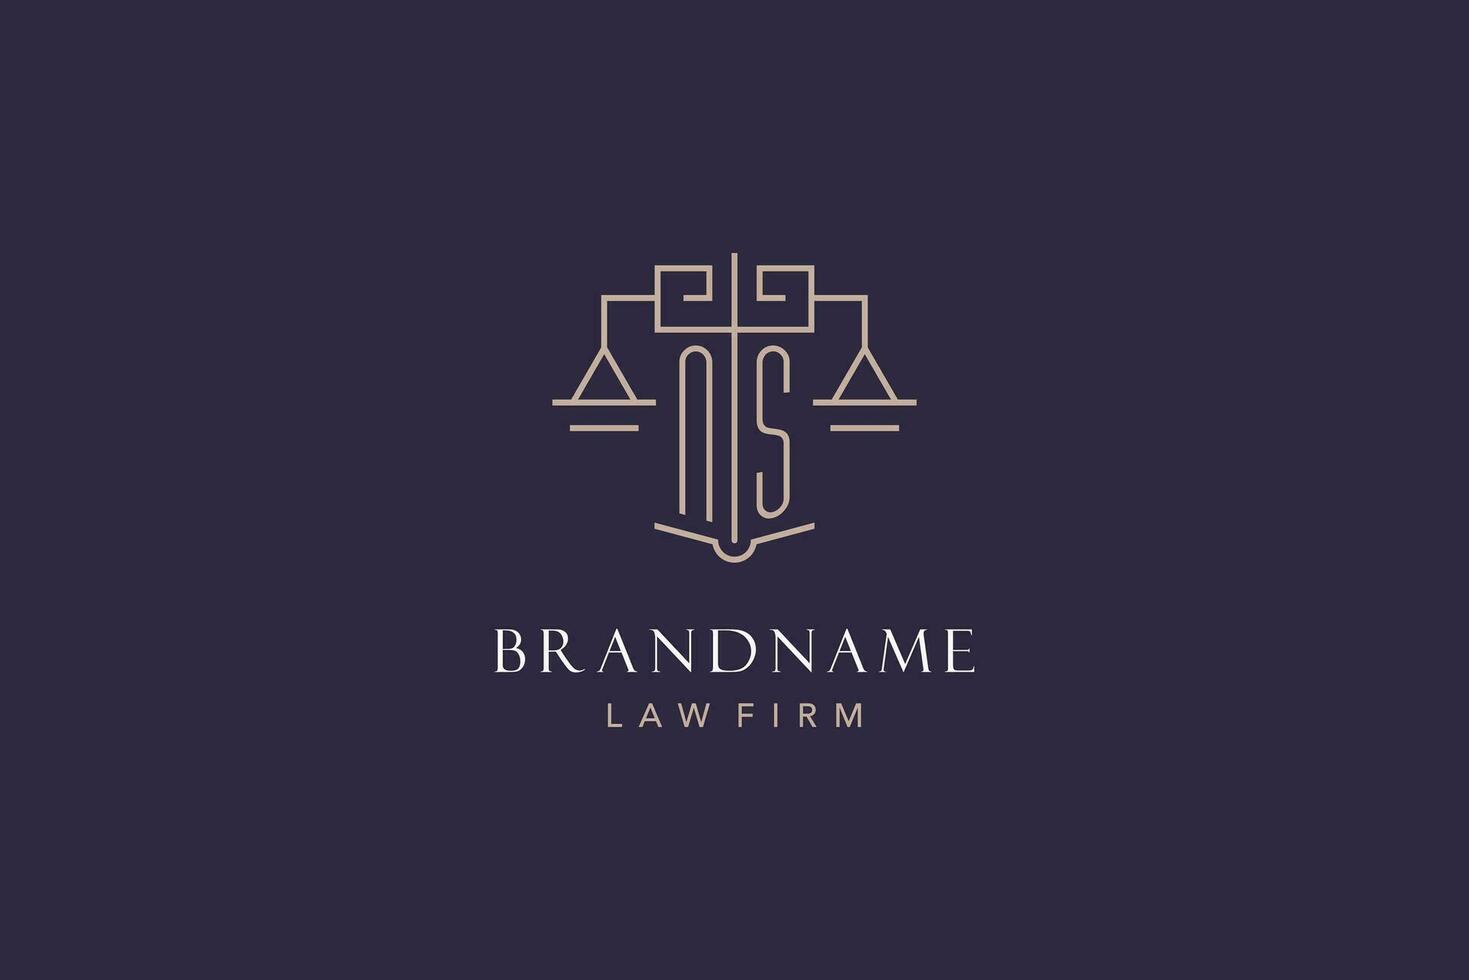 Initial letter NS logo with scale of justice logo design, luxury legal logo geometric style vector